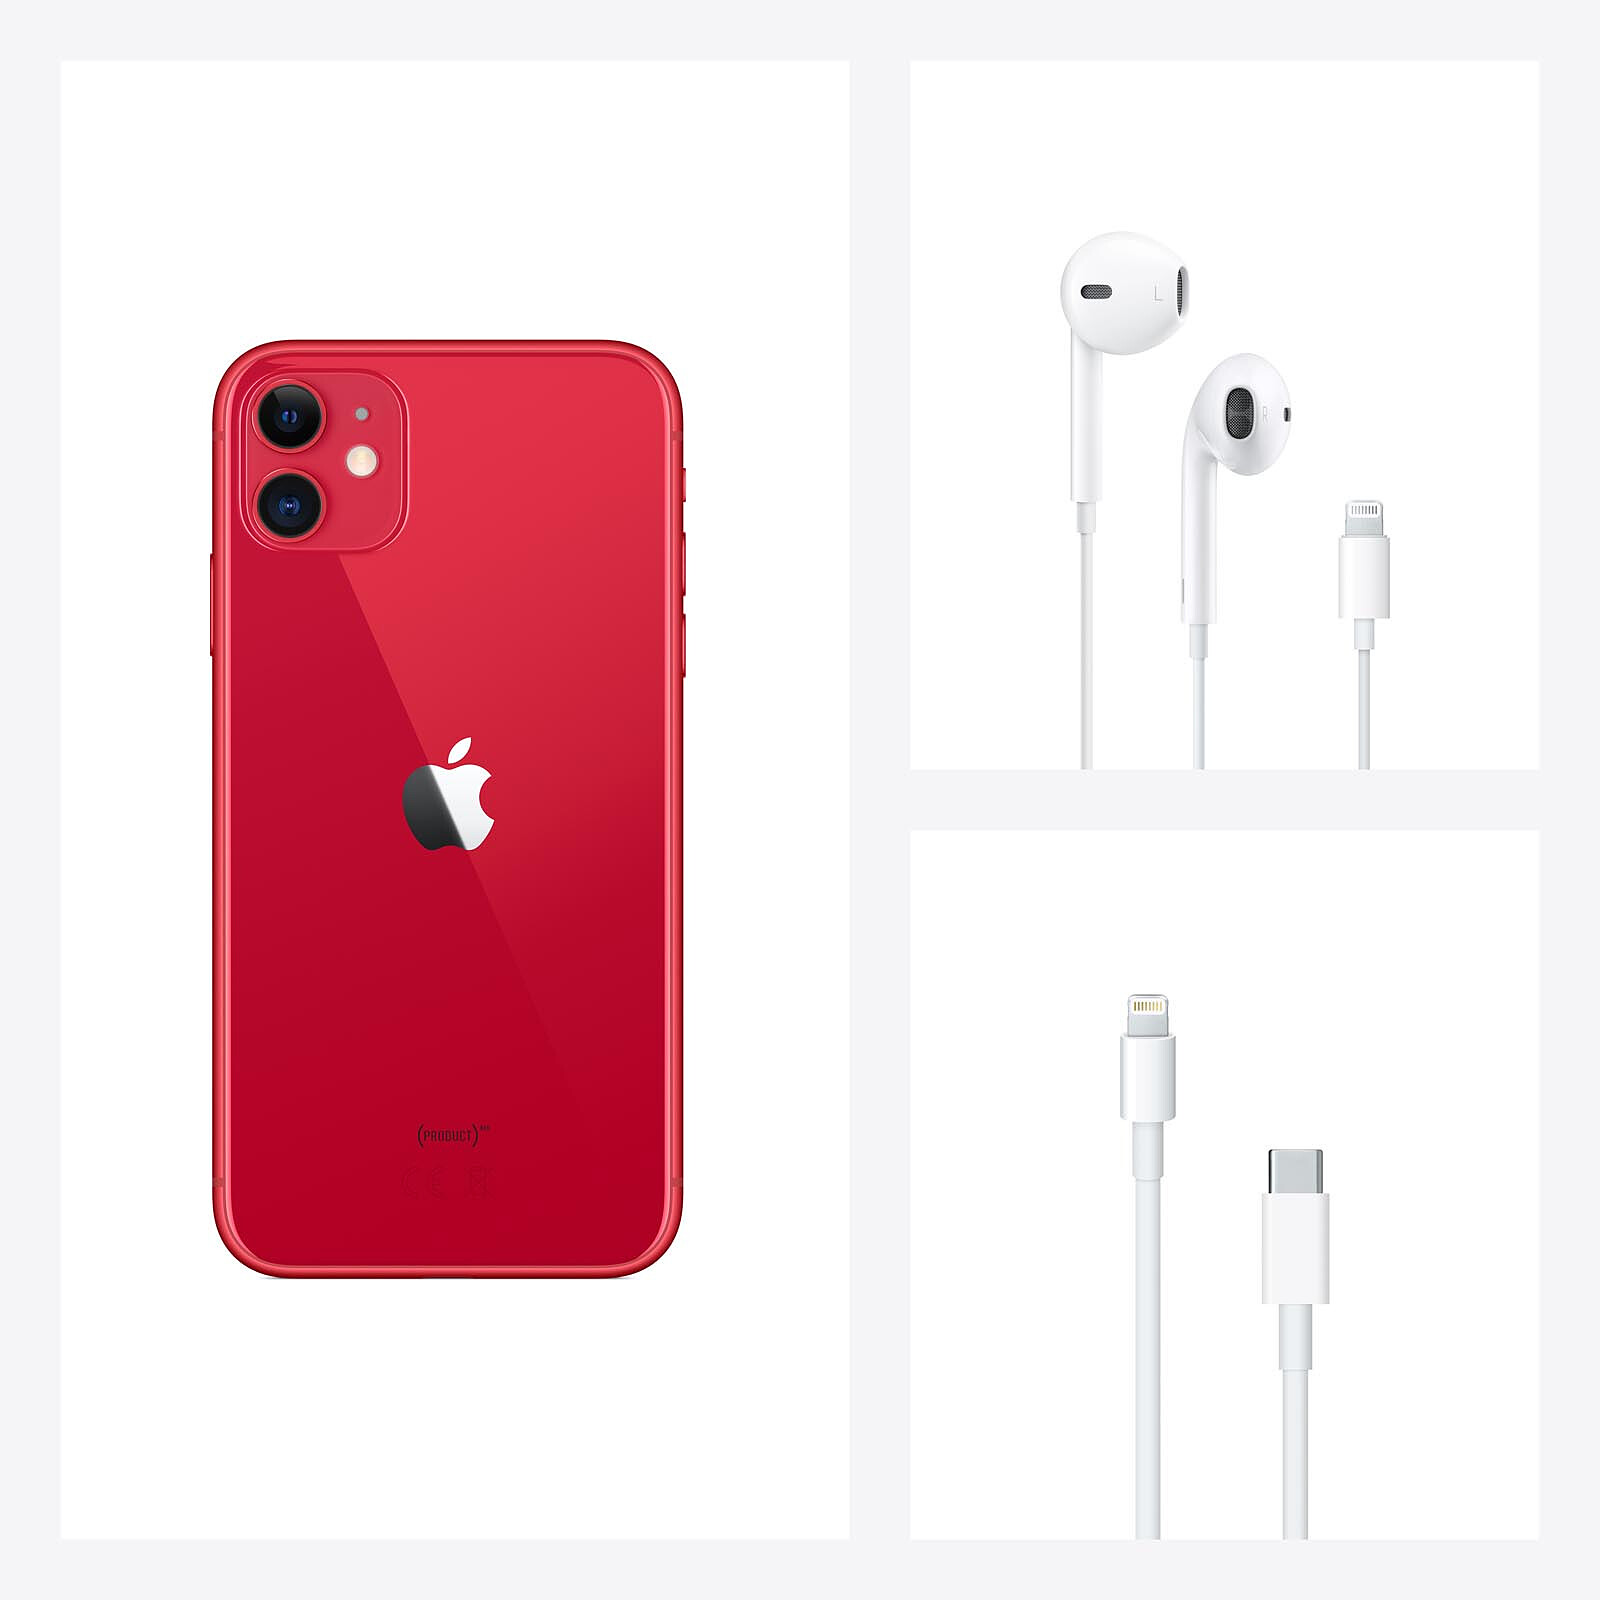 Apple iPhone 11 64GB (PRODUCT)RED - Mobile phone & smartphone